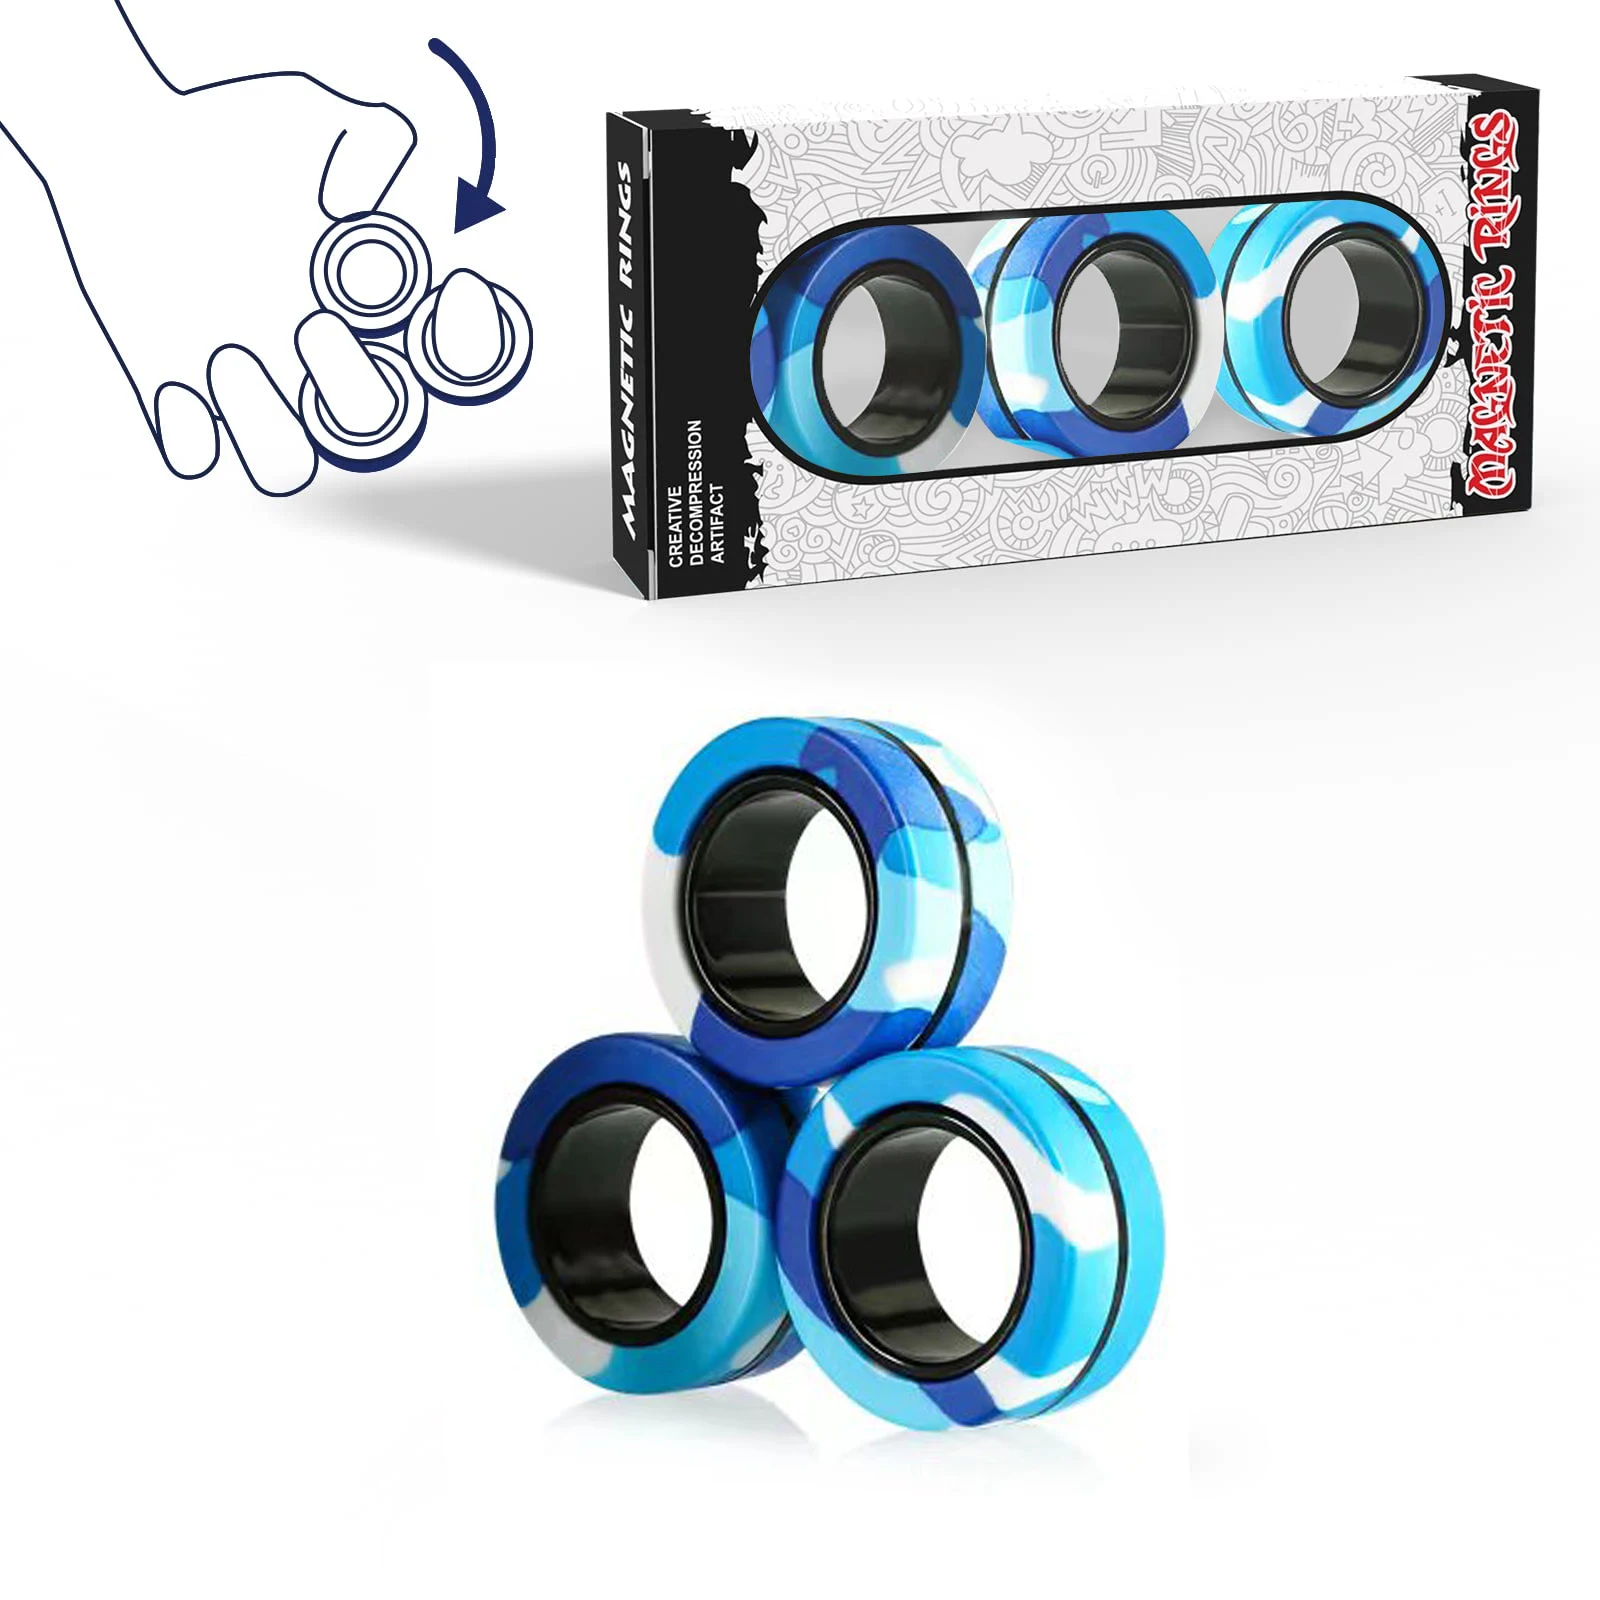 9-3Pcs Magnetic Rings Fidget Toy Set, Idea ADHD Anxiety Decompression  Magnetic Fidget Toys Adult Fidget Spinner Rings for Relief, Finger Fidget  Toys - Gifts for 8 9 10 11 12 13+ Year Old Boy Girl Teen - Walmart.com